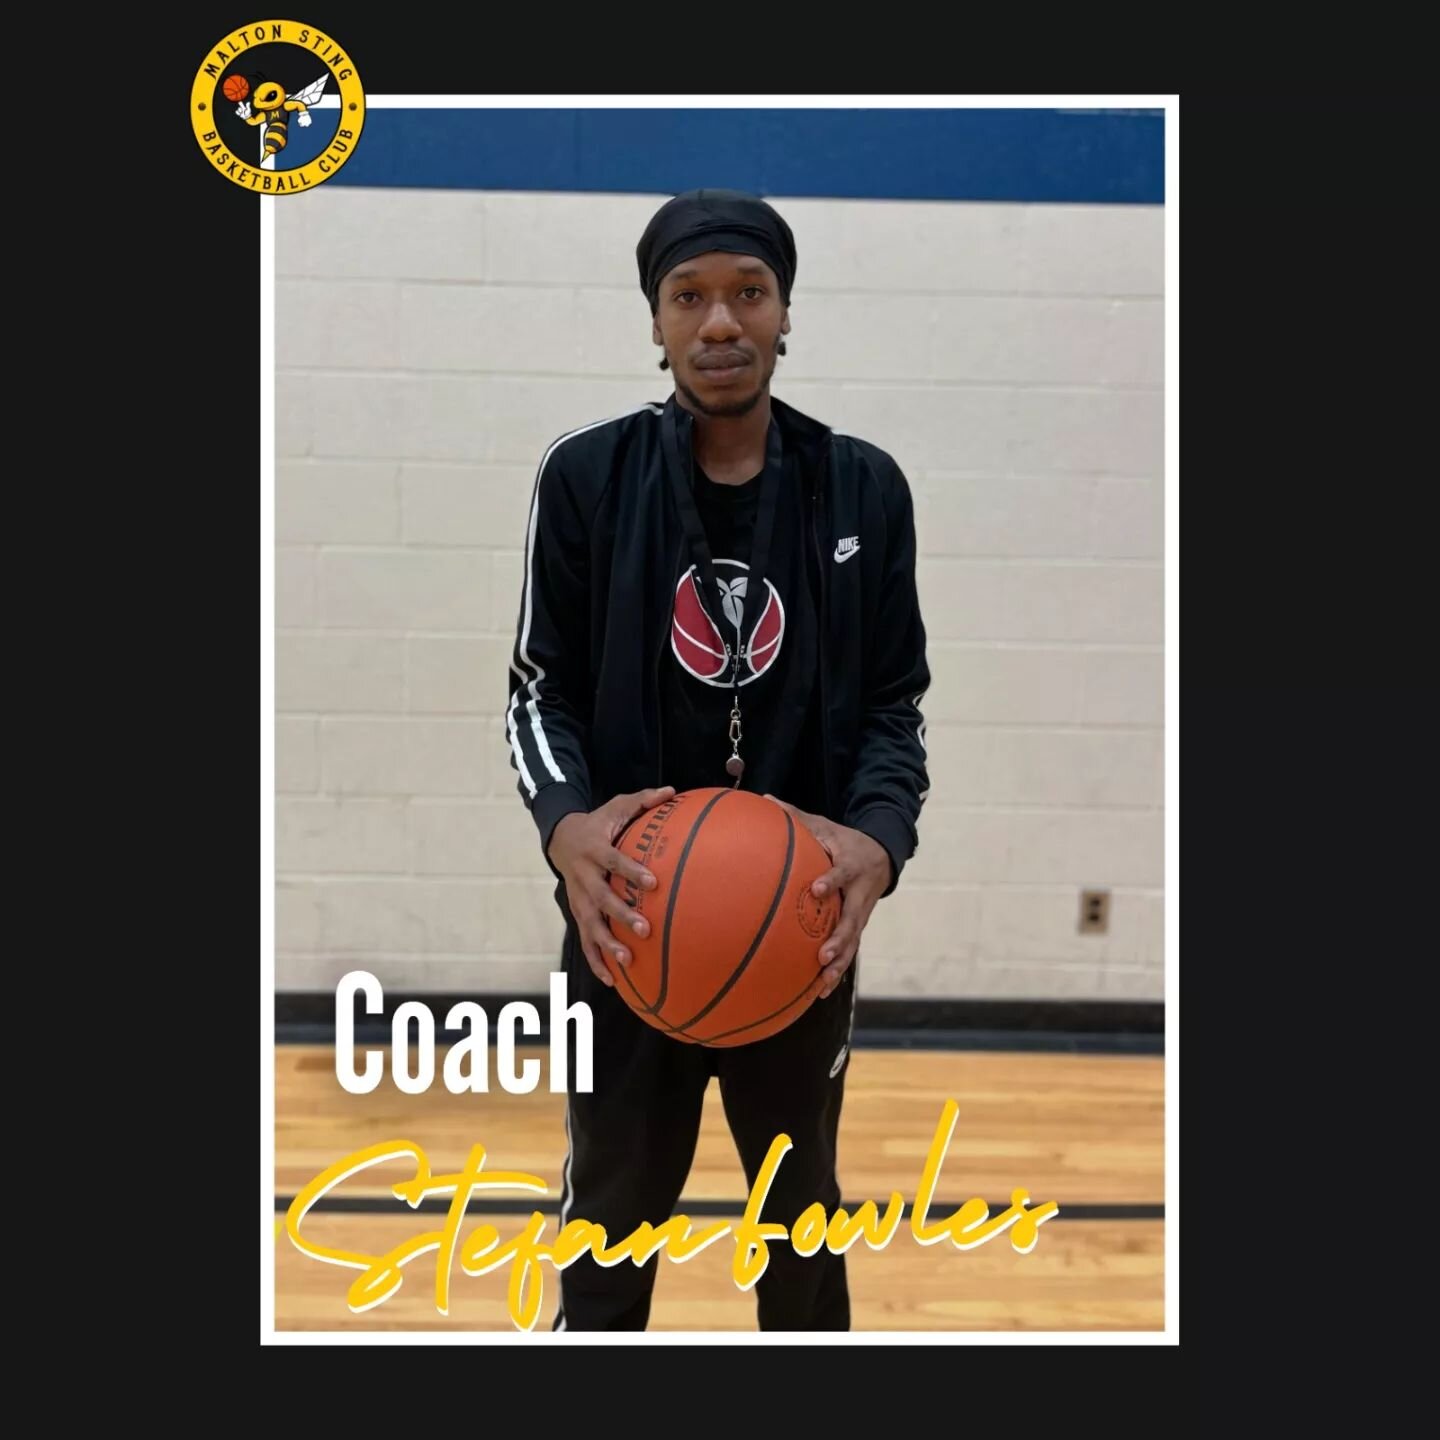 🐝Coach Fowles started coaching as of recent with Malton Sting's U13 team as an apprentice coach.🐝
 
🏀Stefan played for C.W Jeffery&rsquo;s in his junior year in high school and won regional championships. He also played for Recognize the Real/YAAA